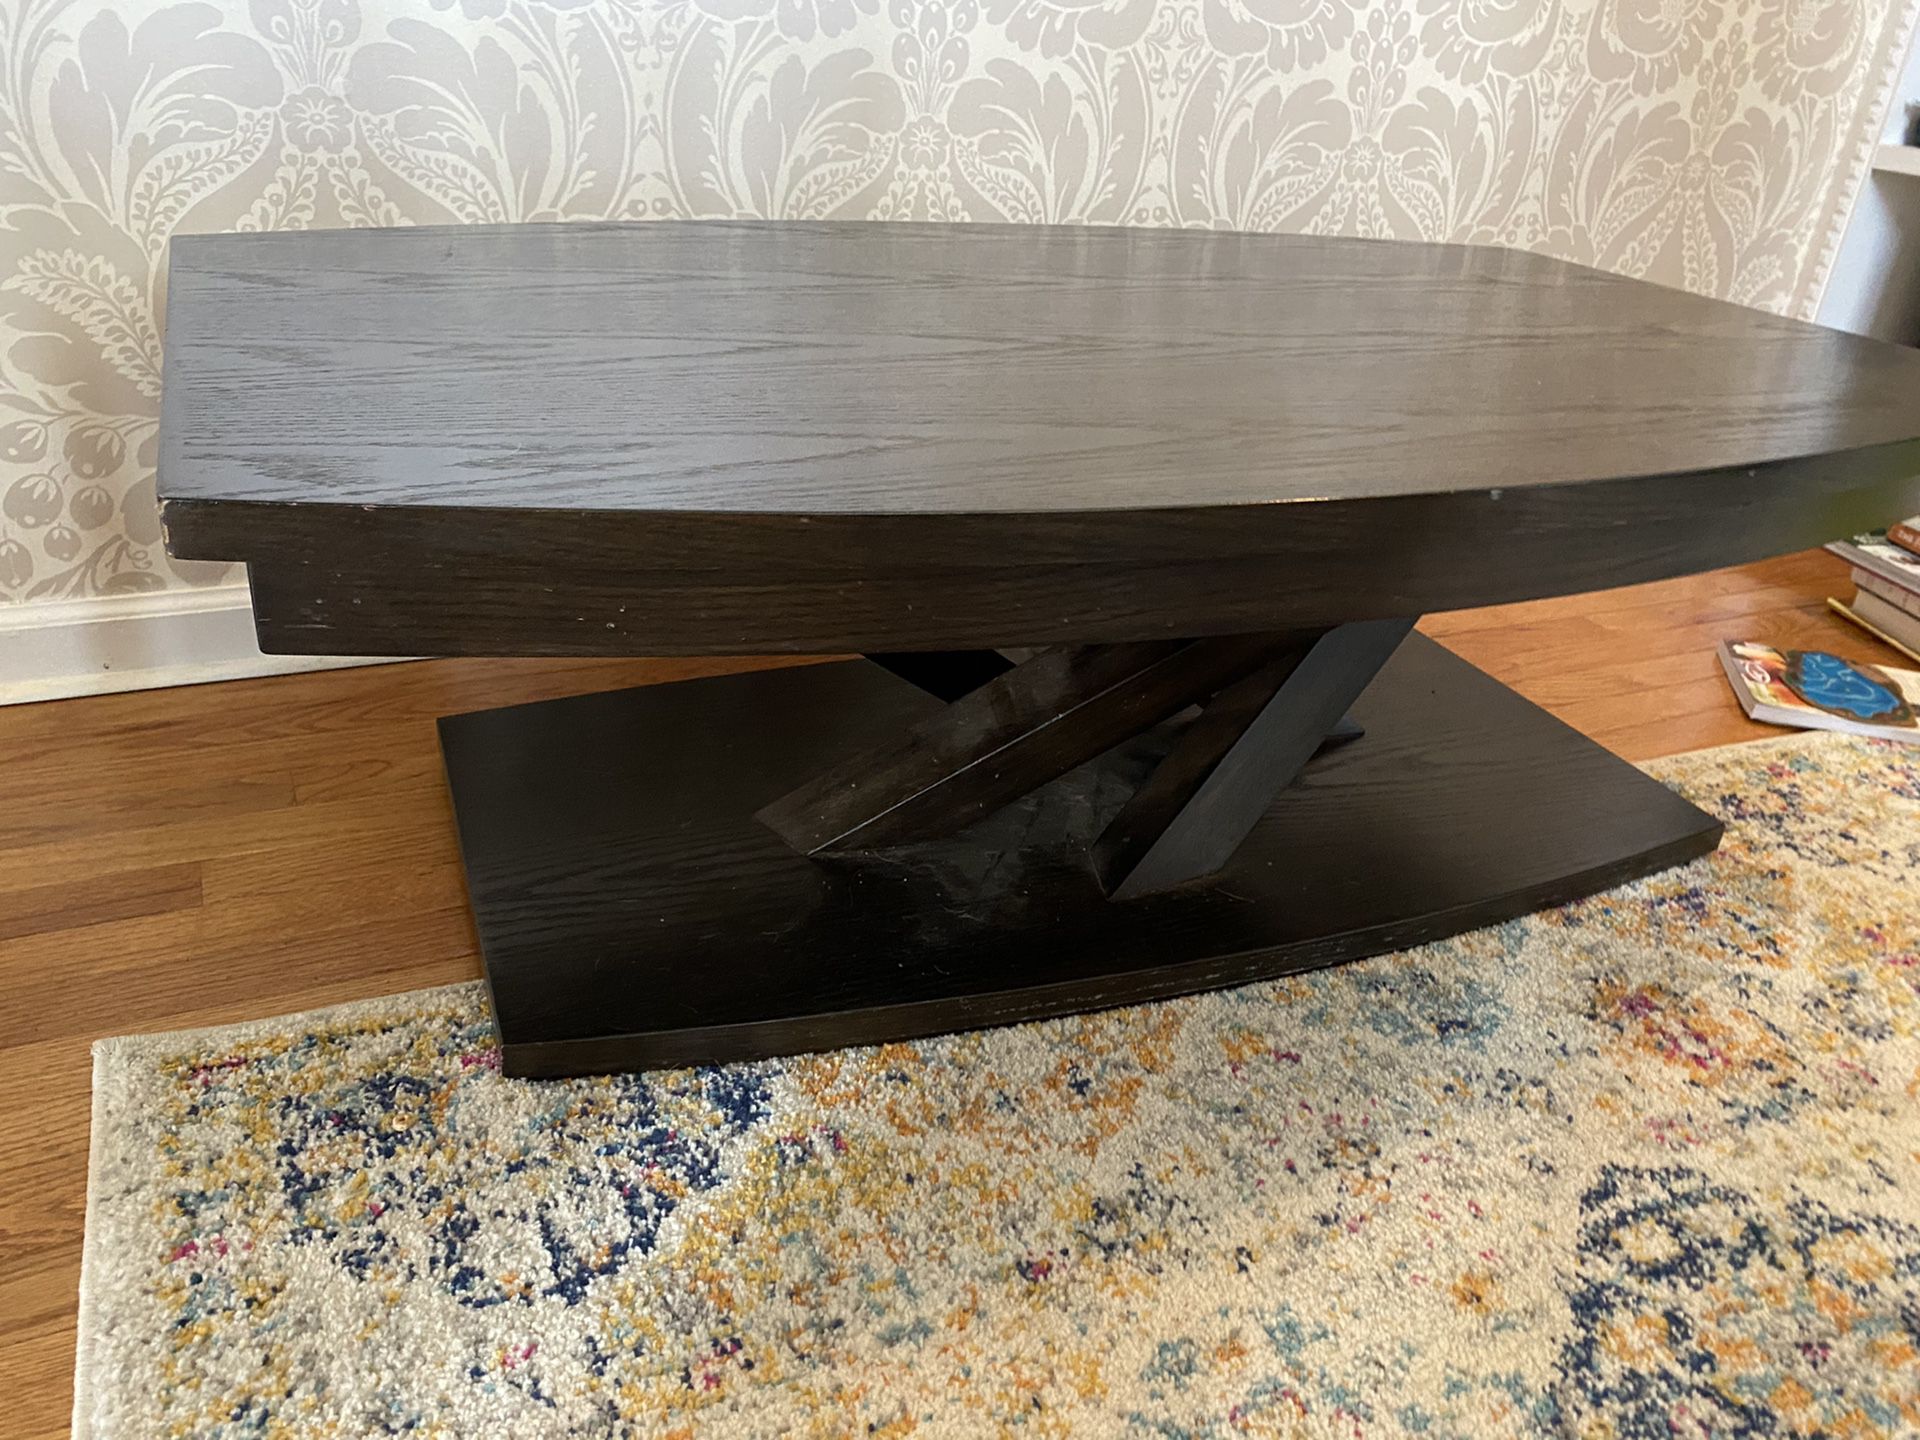 Solid wood coffee table and standing shelves